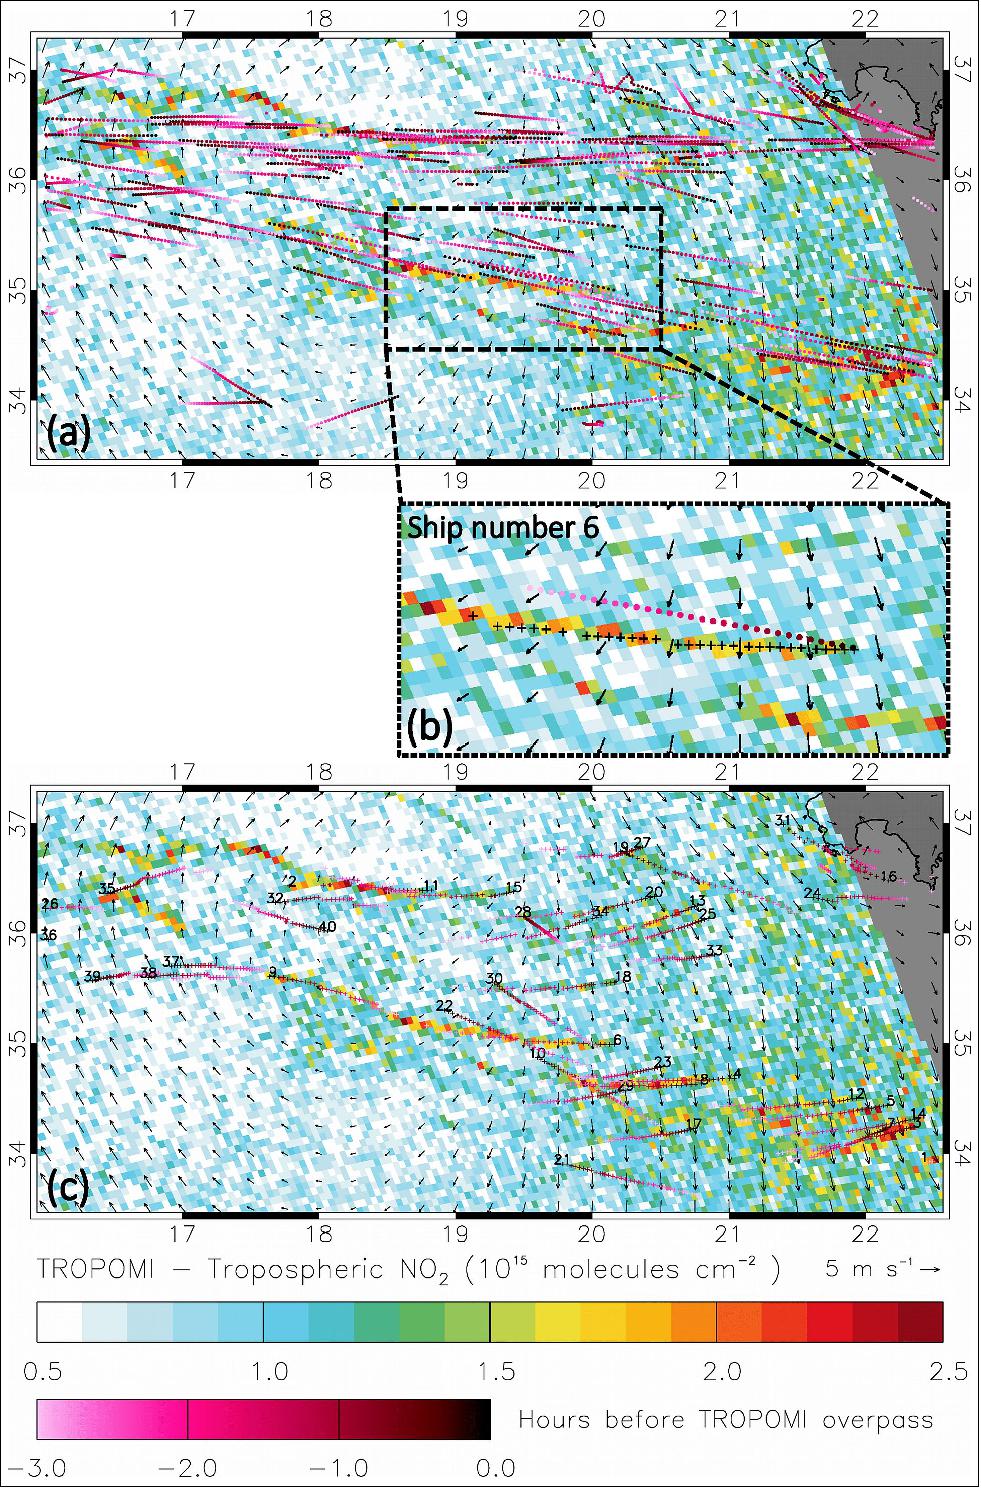 Figure 45: Nitrogen dioxide concentration patterns under sun glint conditions. For the first time, scientists, using data from the Copernicus Sentinel-5P satellite, are now able to detect nitrogen dioxide plumes from individual ships from space. The image shows the nitrogen dioxide patterns under sun glint viewing conditions, as well as 10-meter wind fields from the ECMWF operational model analyses, and AIS ship locations from the last three hours before, and up to, Sentinel-5P's overpass time. Dark magenta colors are used for the ship positions close to the satellite's overpass time and brighter magenta colors for earlier ship positions. -Image B is an example of the original AIS locations (dots) and the wind-shifted plume locations (crosses) of a ship (Ship 6) at the time of TROPOMI's overpass. - Image C is the same as Image A but for the projected wind-shifted plume locations of the 40 ships with a length larger than 200 m. The ships are numbered according to their nitrogen dioxide levels. Dark magenta colors are used for ship plumes emitted close to the satellite's overpass time and brighter magenta colors for earlier ship plumes (image credit: ESA, the image contains modified Copernicus Sentinel data (2018), processed by Georgoulias et al.)